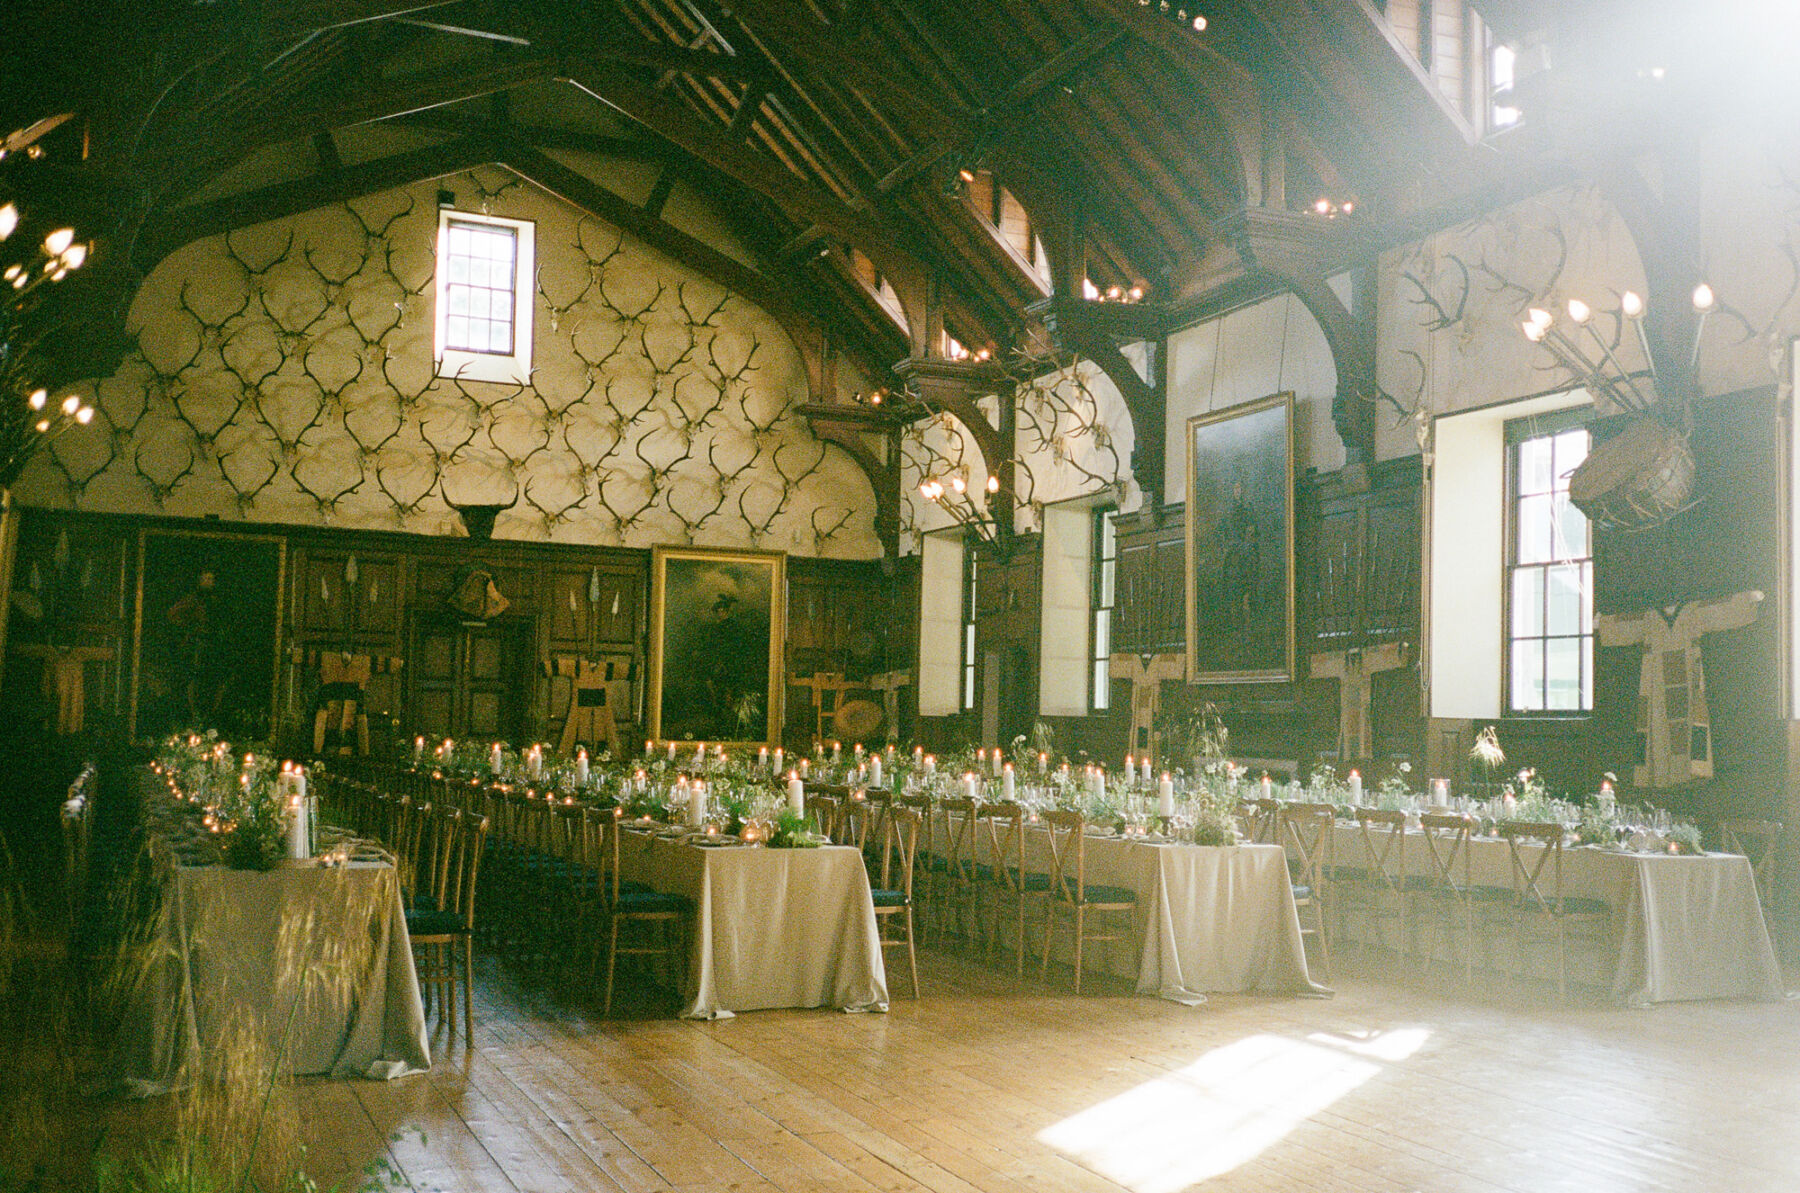 Long wedding tables with crossback chairs inside a hall with stag antlers on the wall. Natural and meadow inspired floral table decor by Joseph Massie. Pillar candles provide ambient lighting.